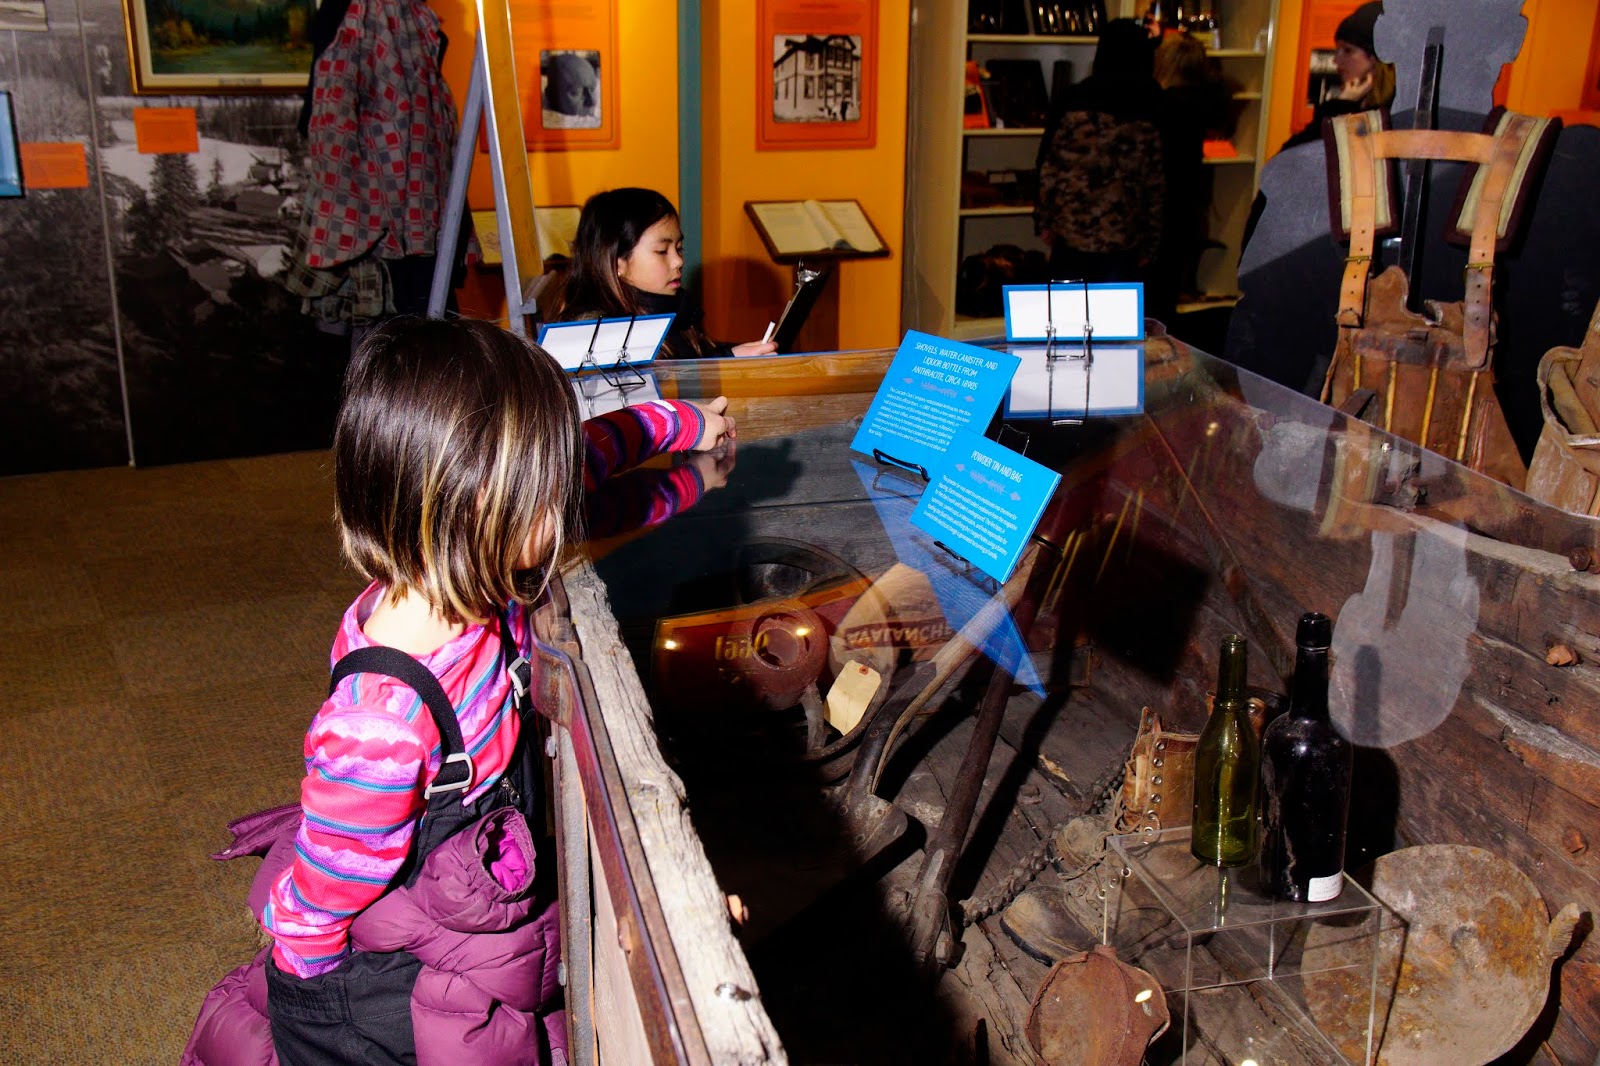 Mining artifacts at Canmore Museum